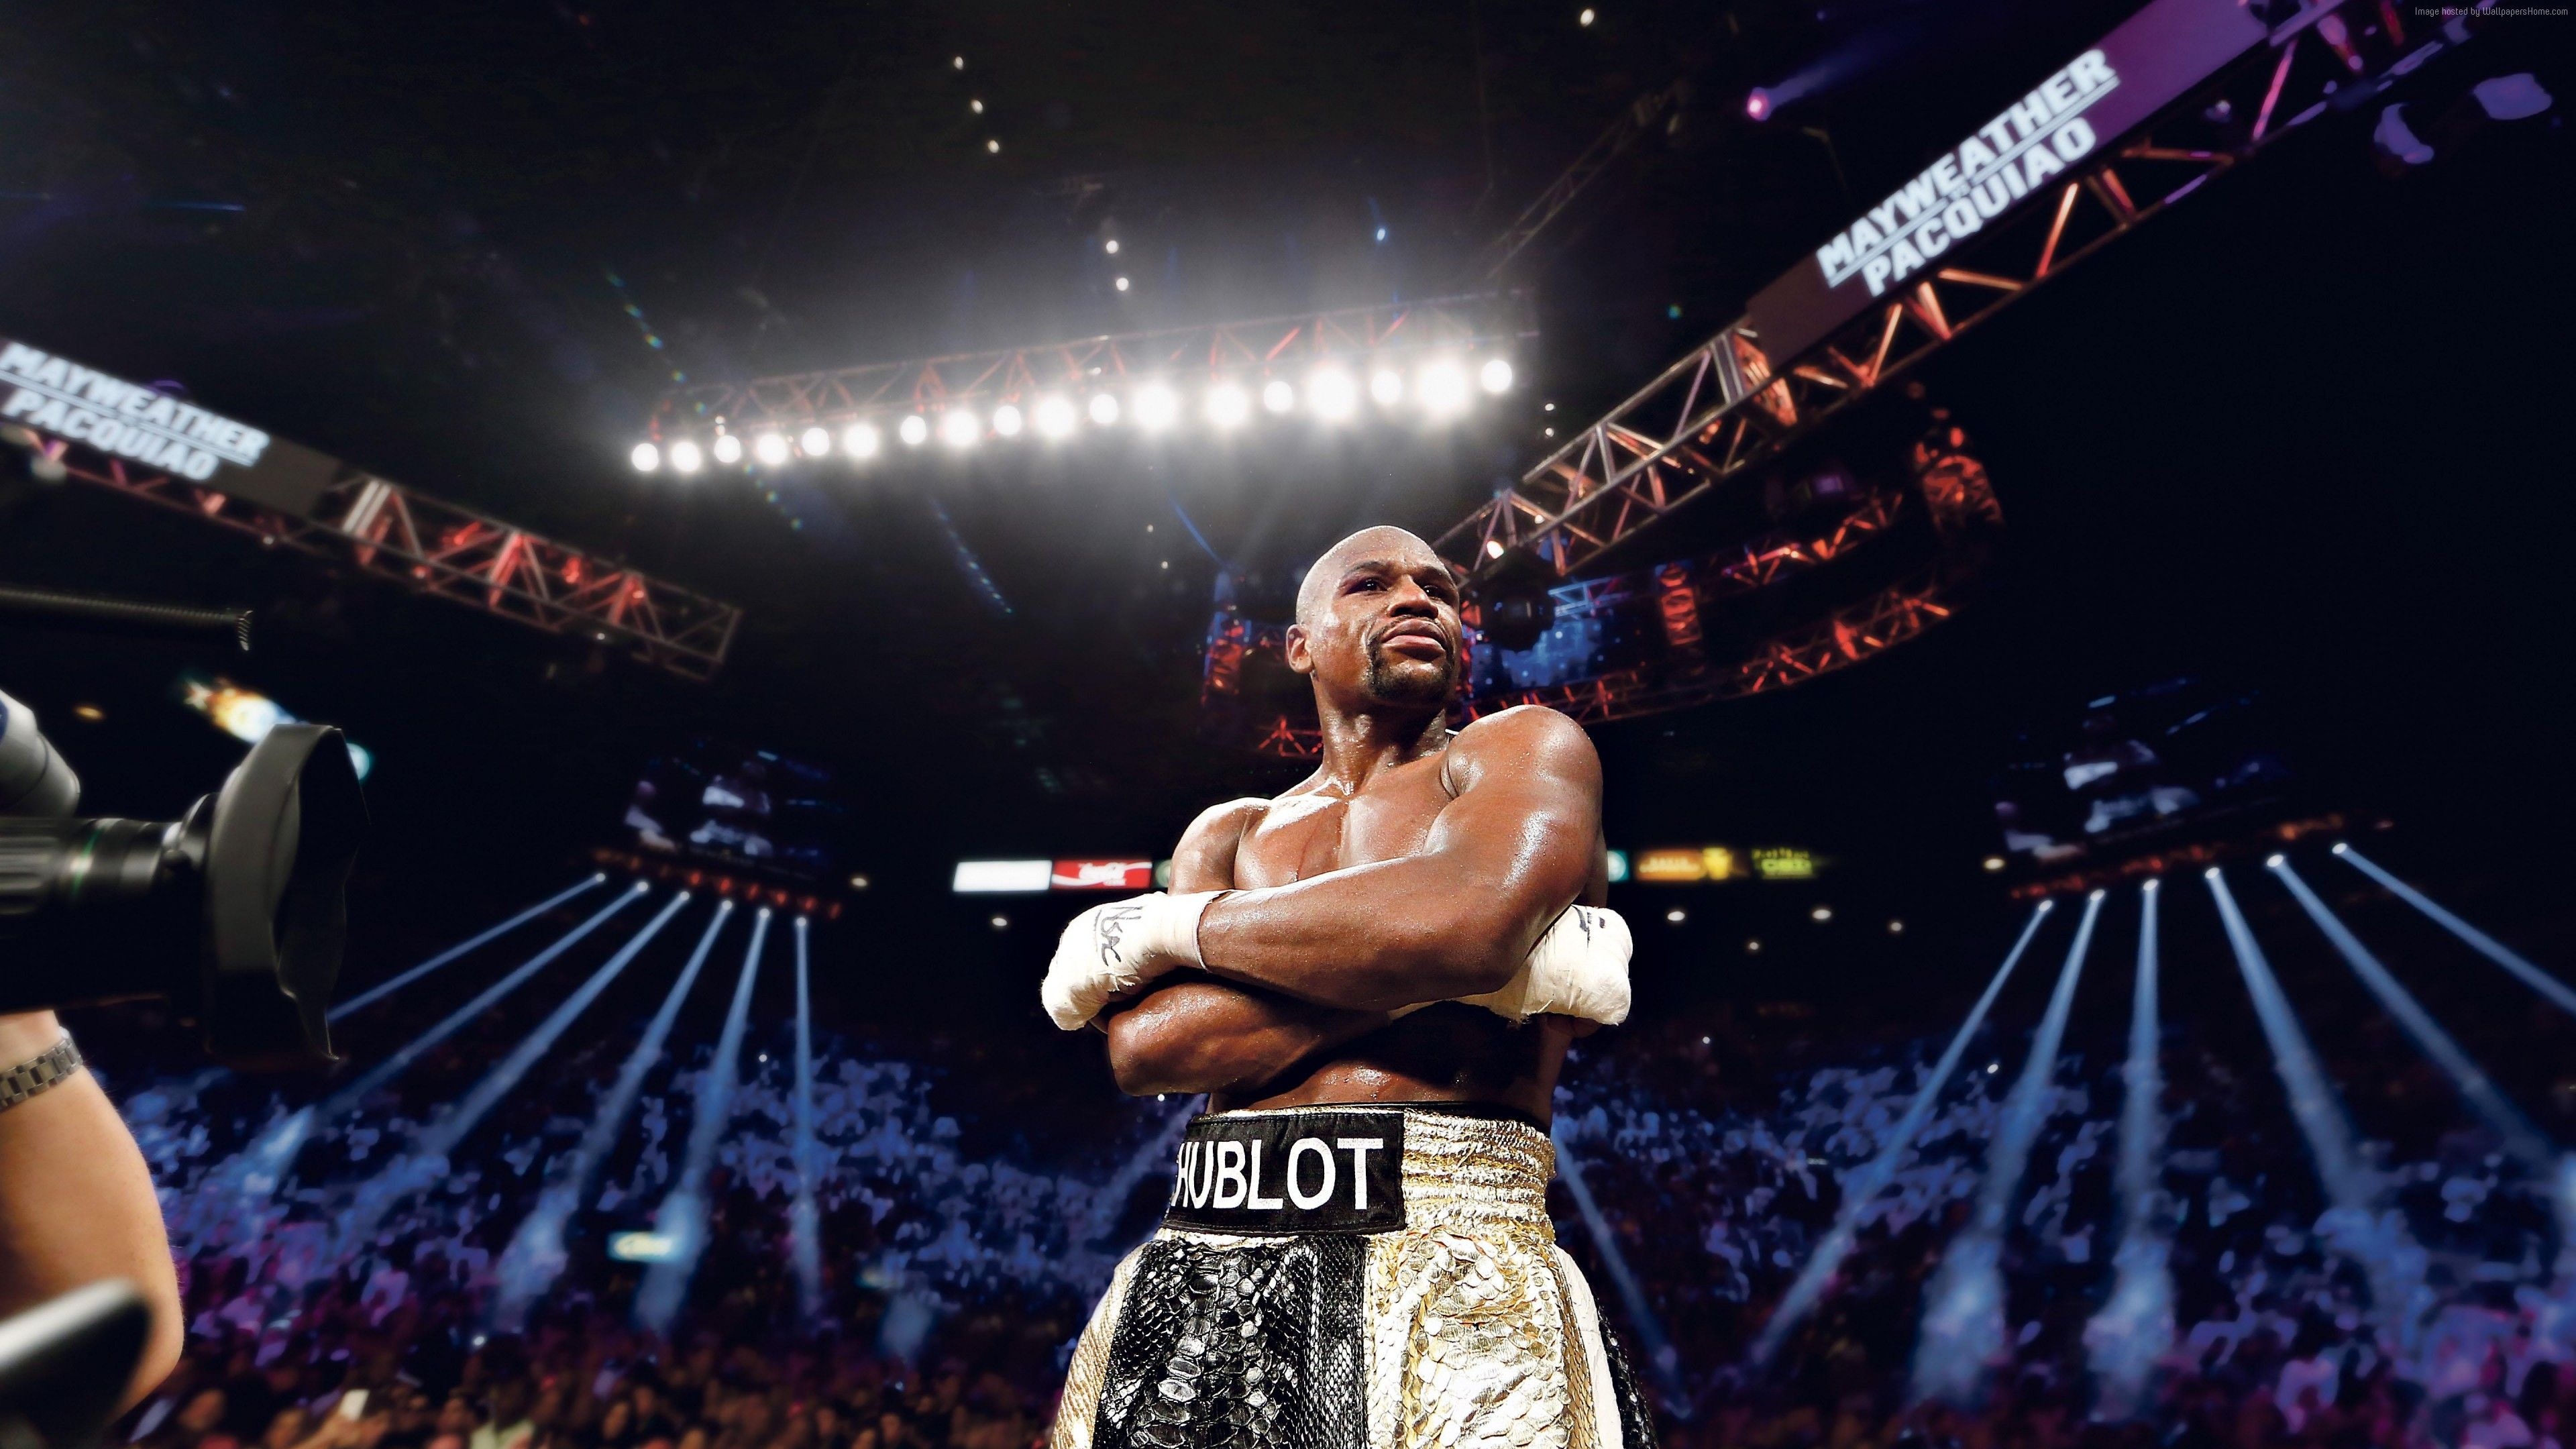 Combat Sports: Floyd Mayweather, Boxing ring, American Boxing, Fighter of the Decade, World Boxing Championships. 3840x2160 4K Wallpaper.